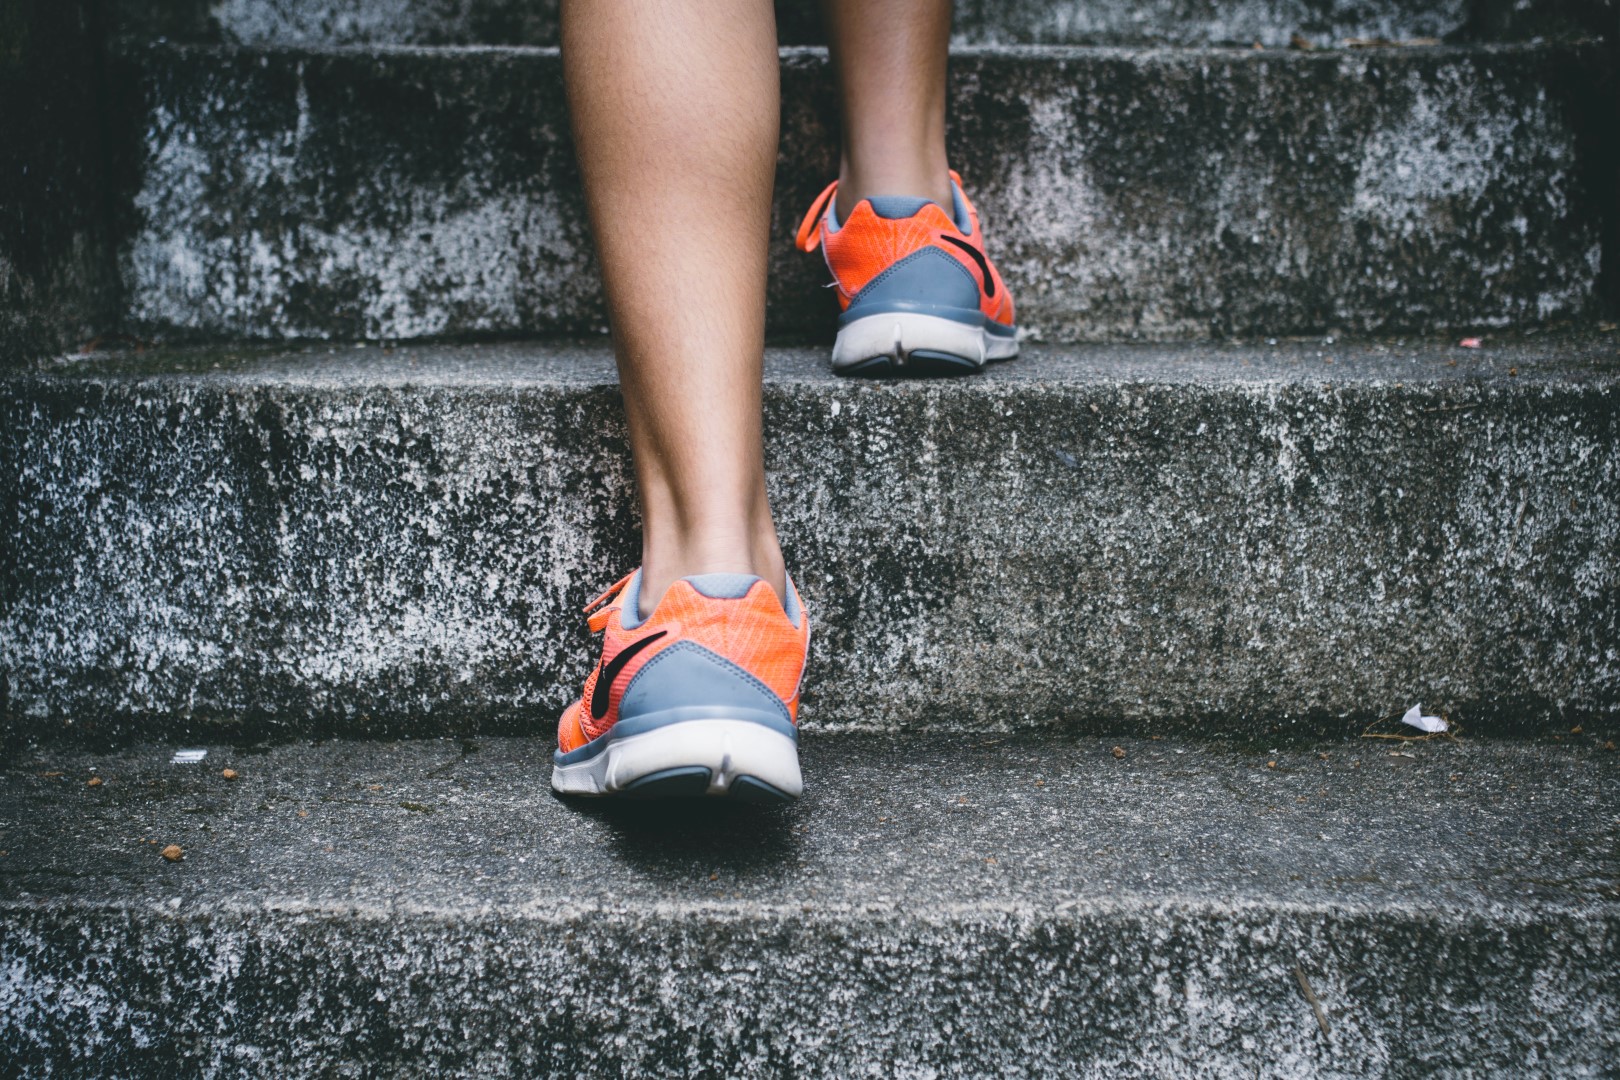 Climbing stairs and staying healthy with GMHBA Health Insurance